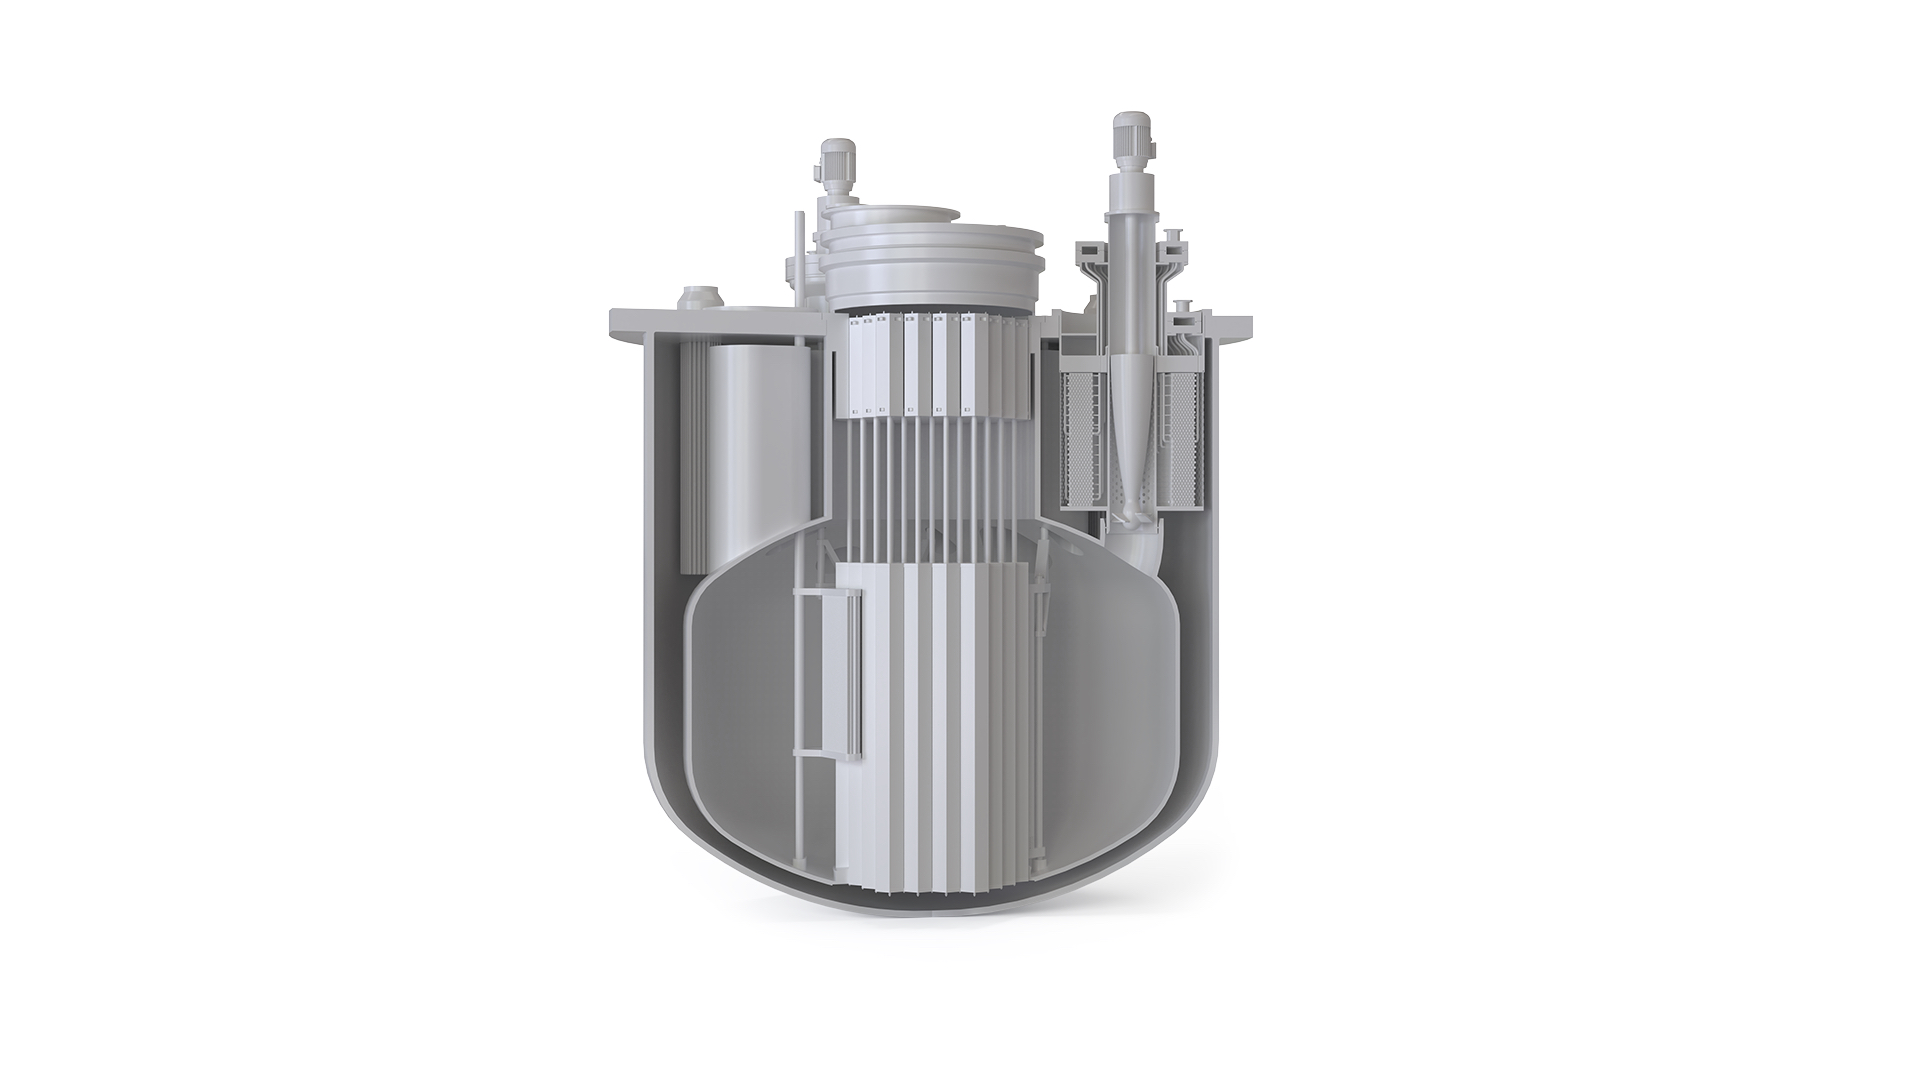 Lead fast reactor overview. newcleo source